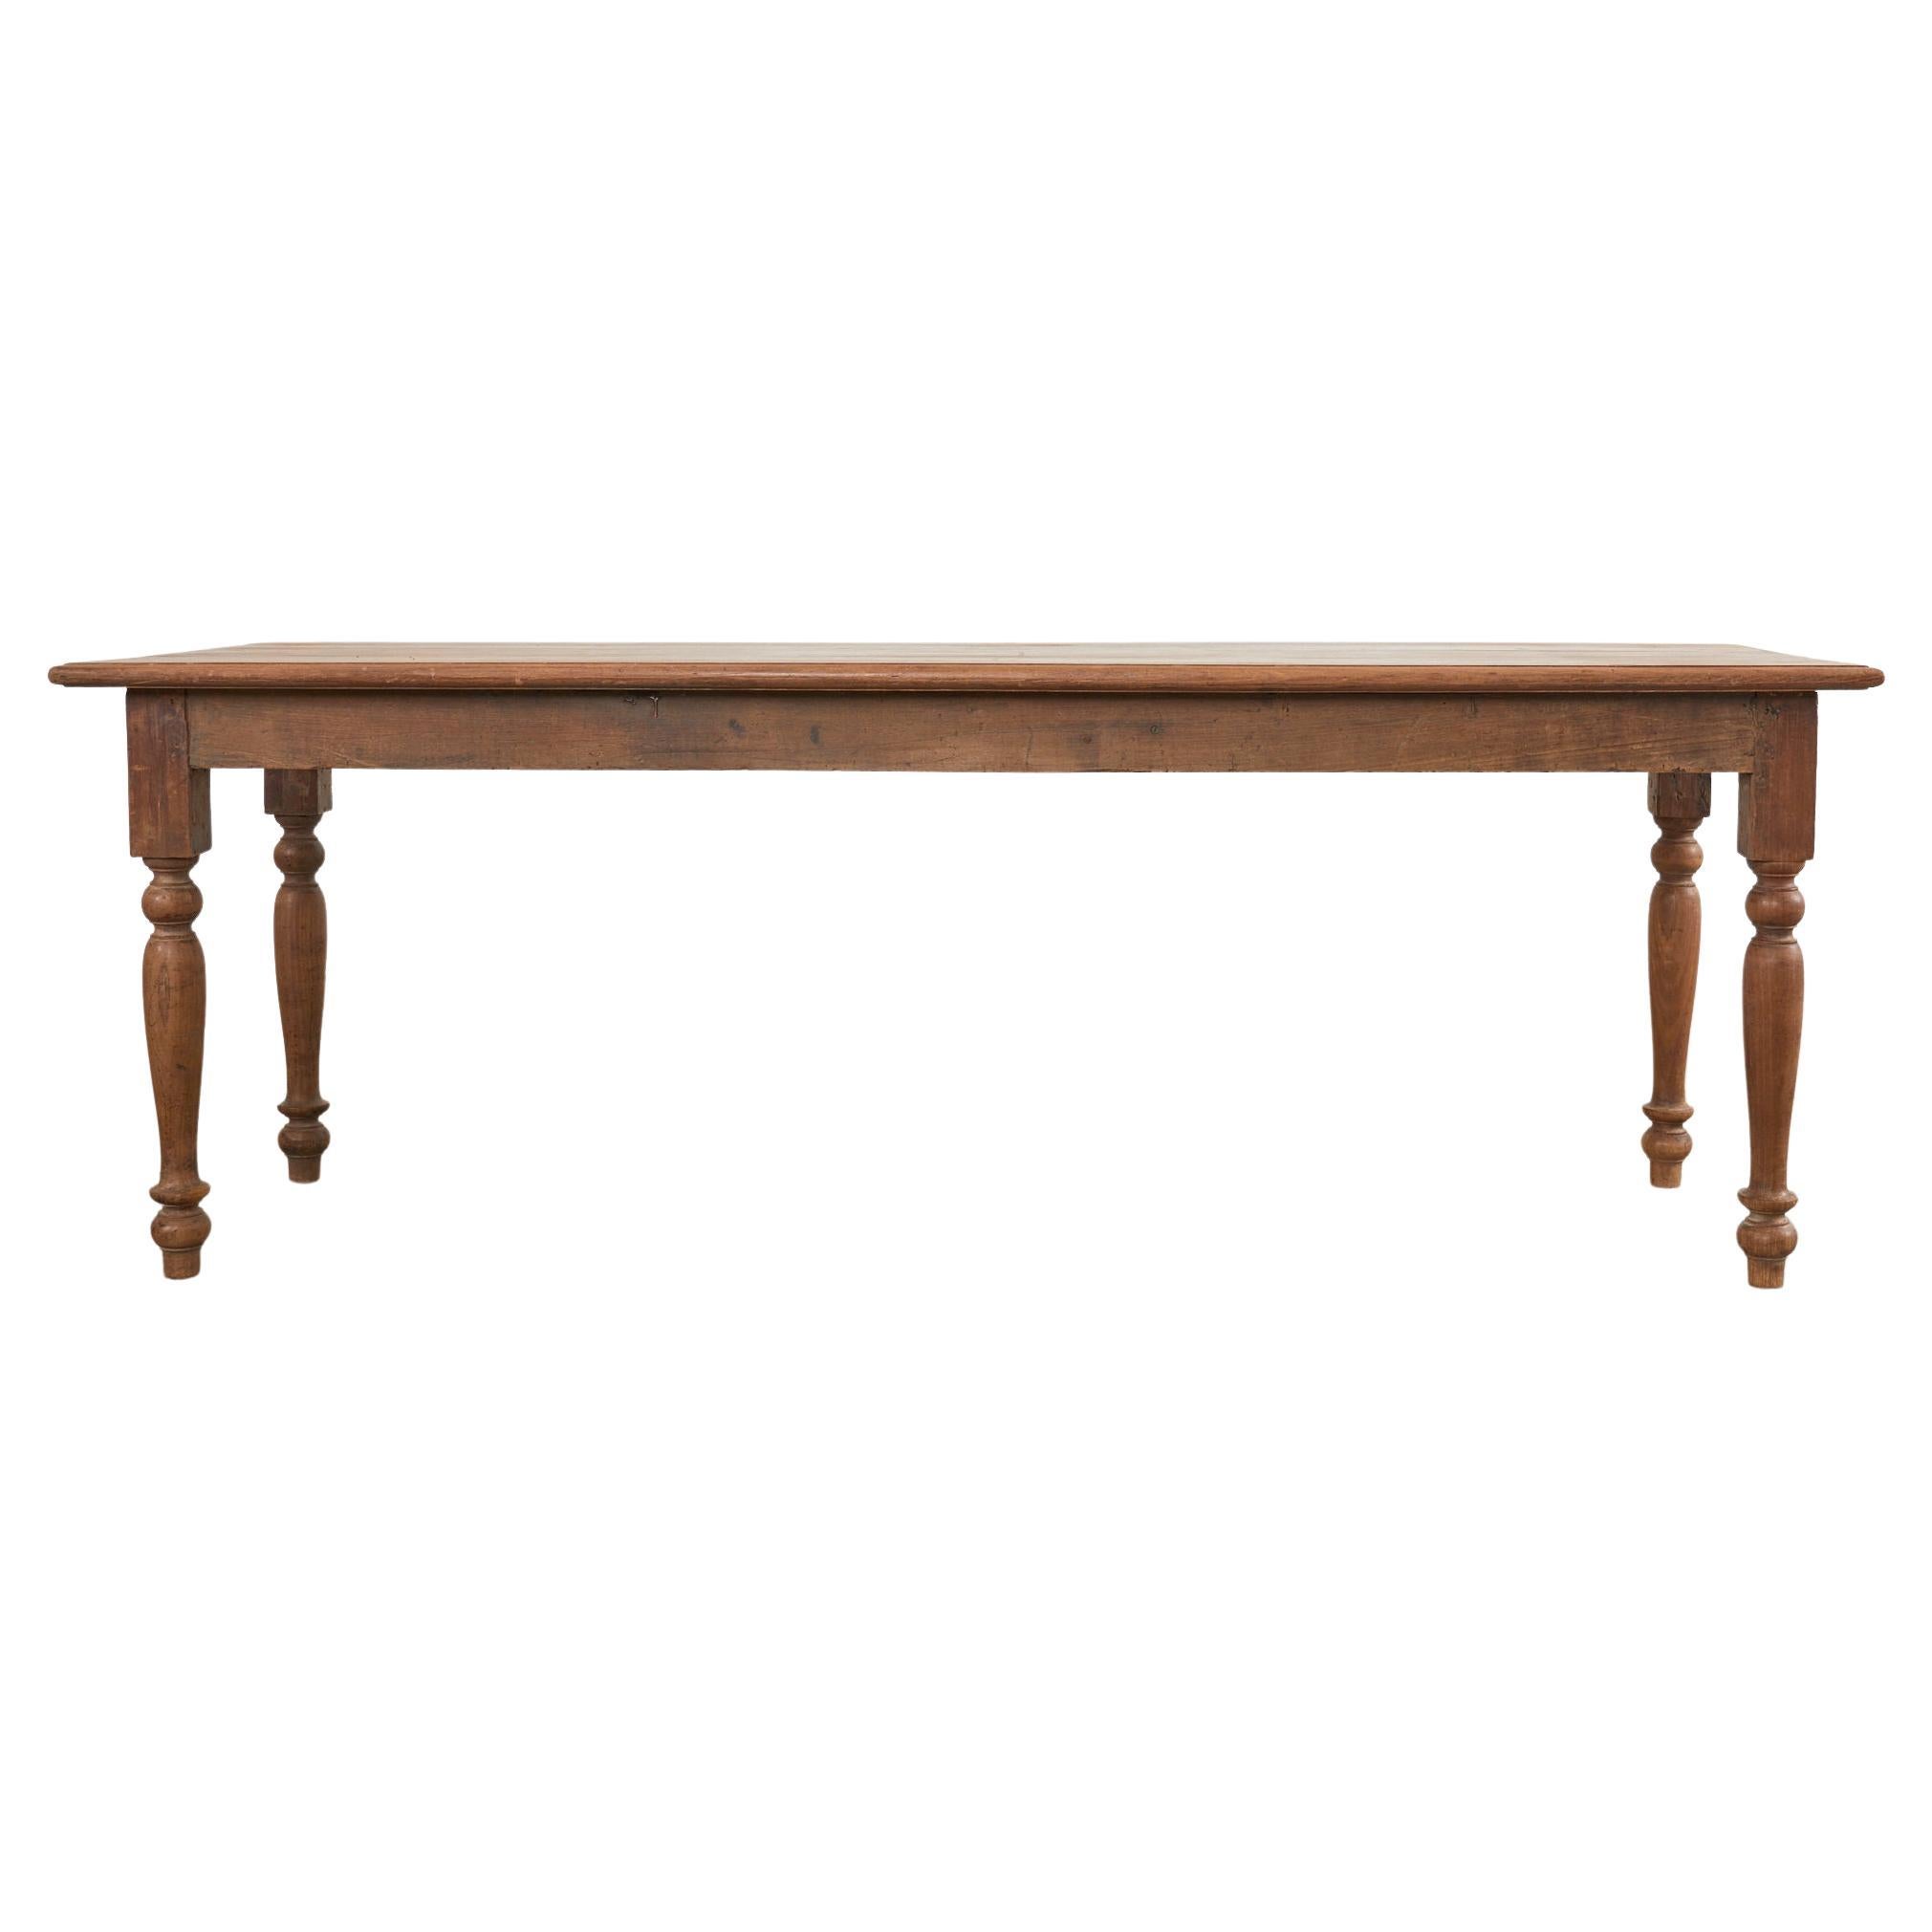 19th Century Country English Provincial Elm Farmhouse Dining Table For Sale